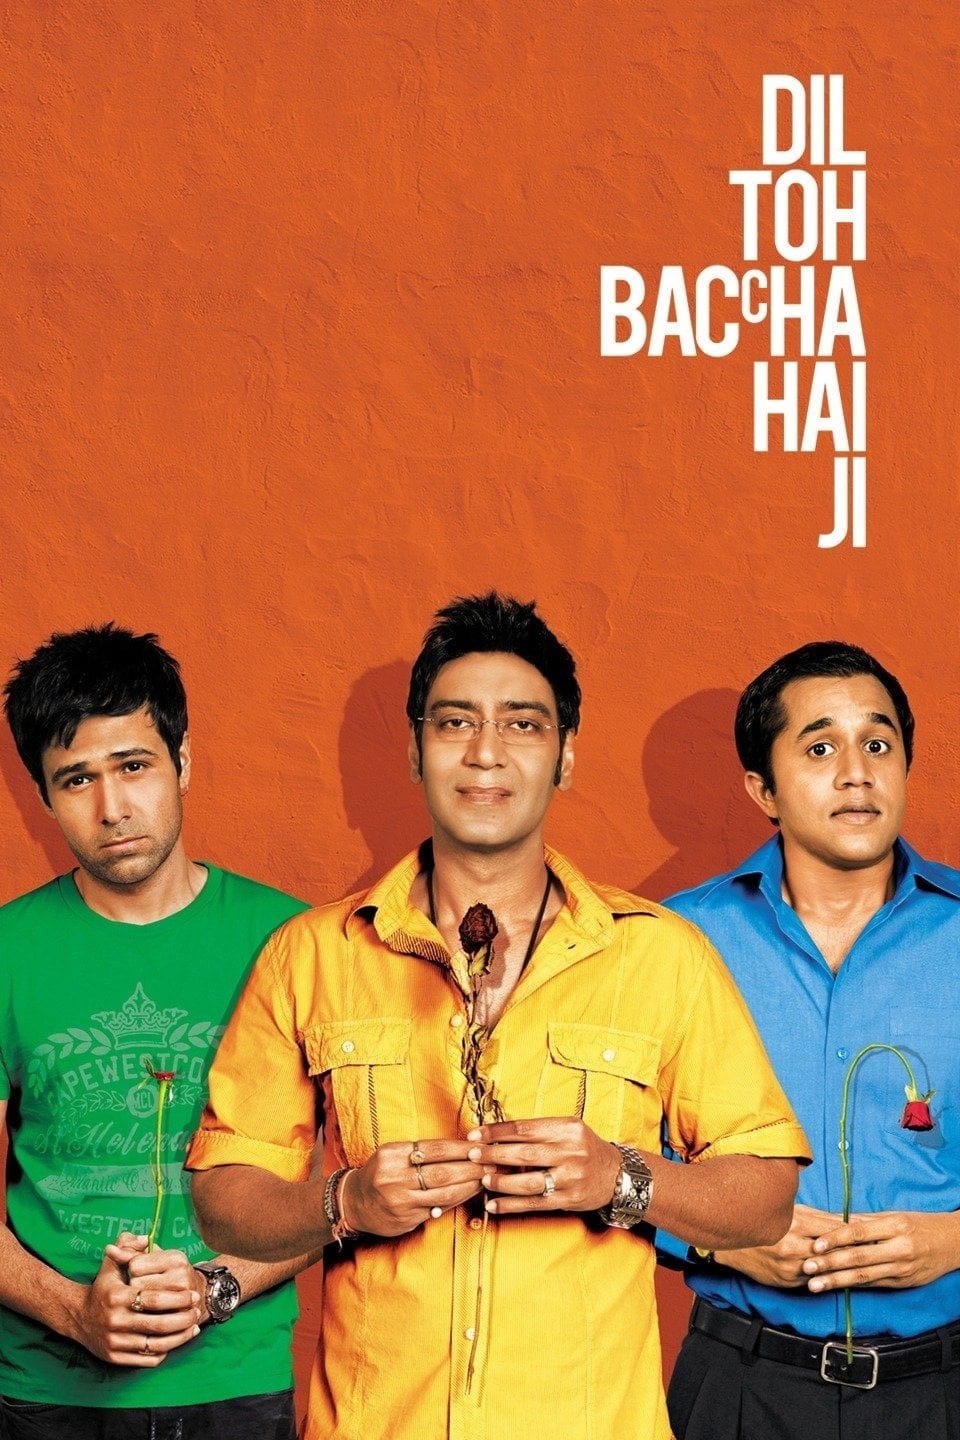 Poster for the movie "Dil Toh Baccha Hai Ji"